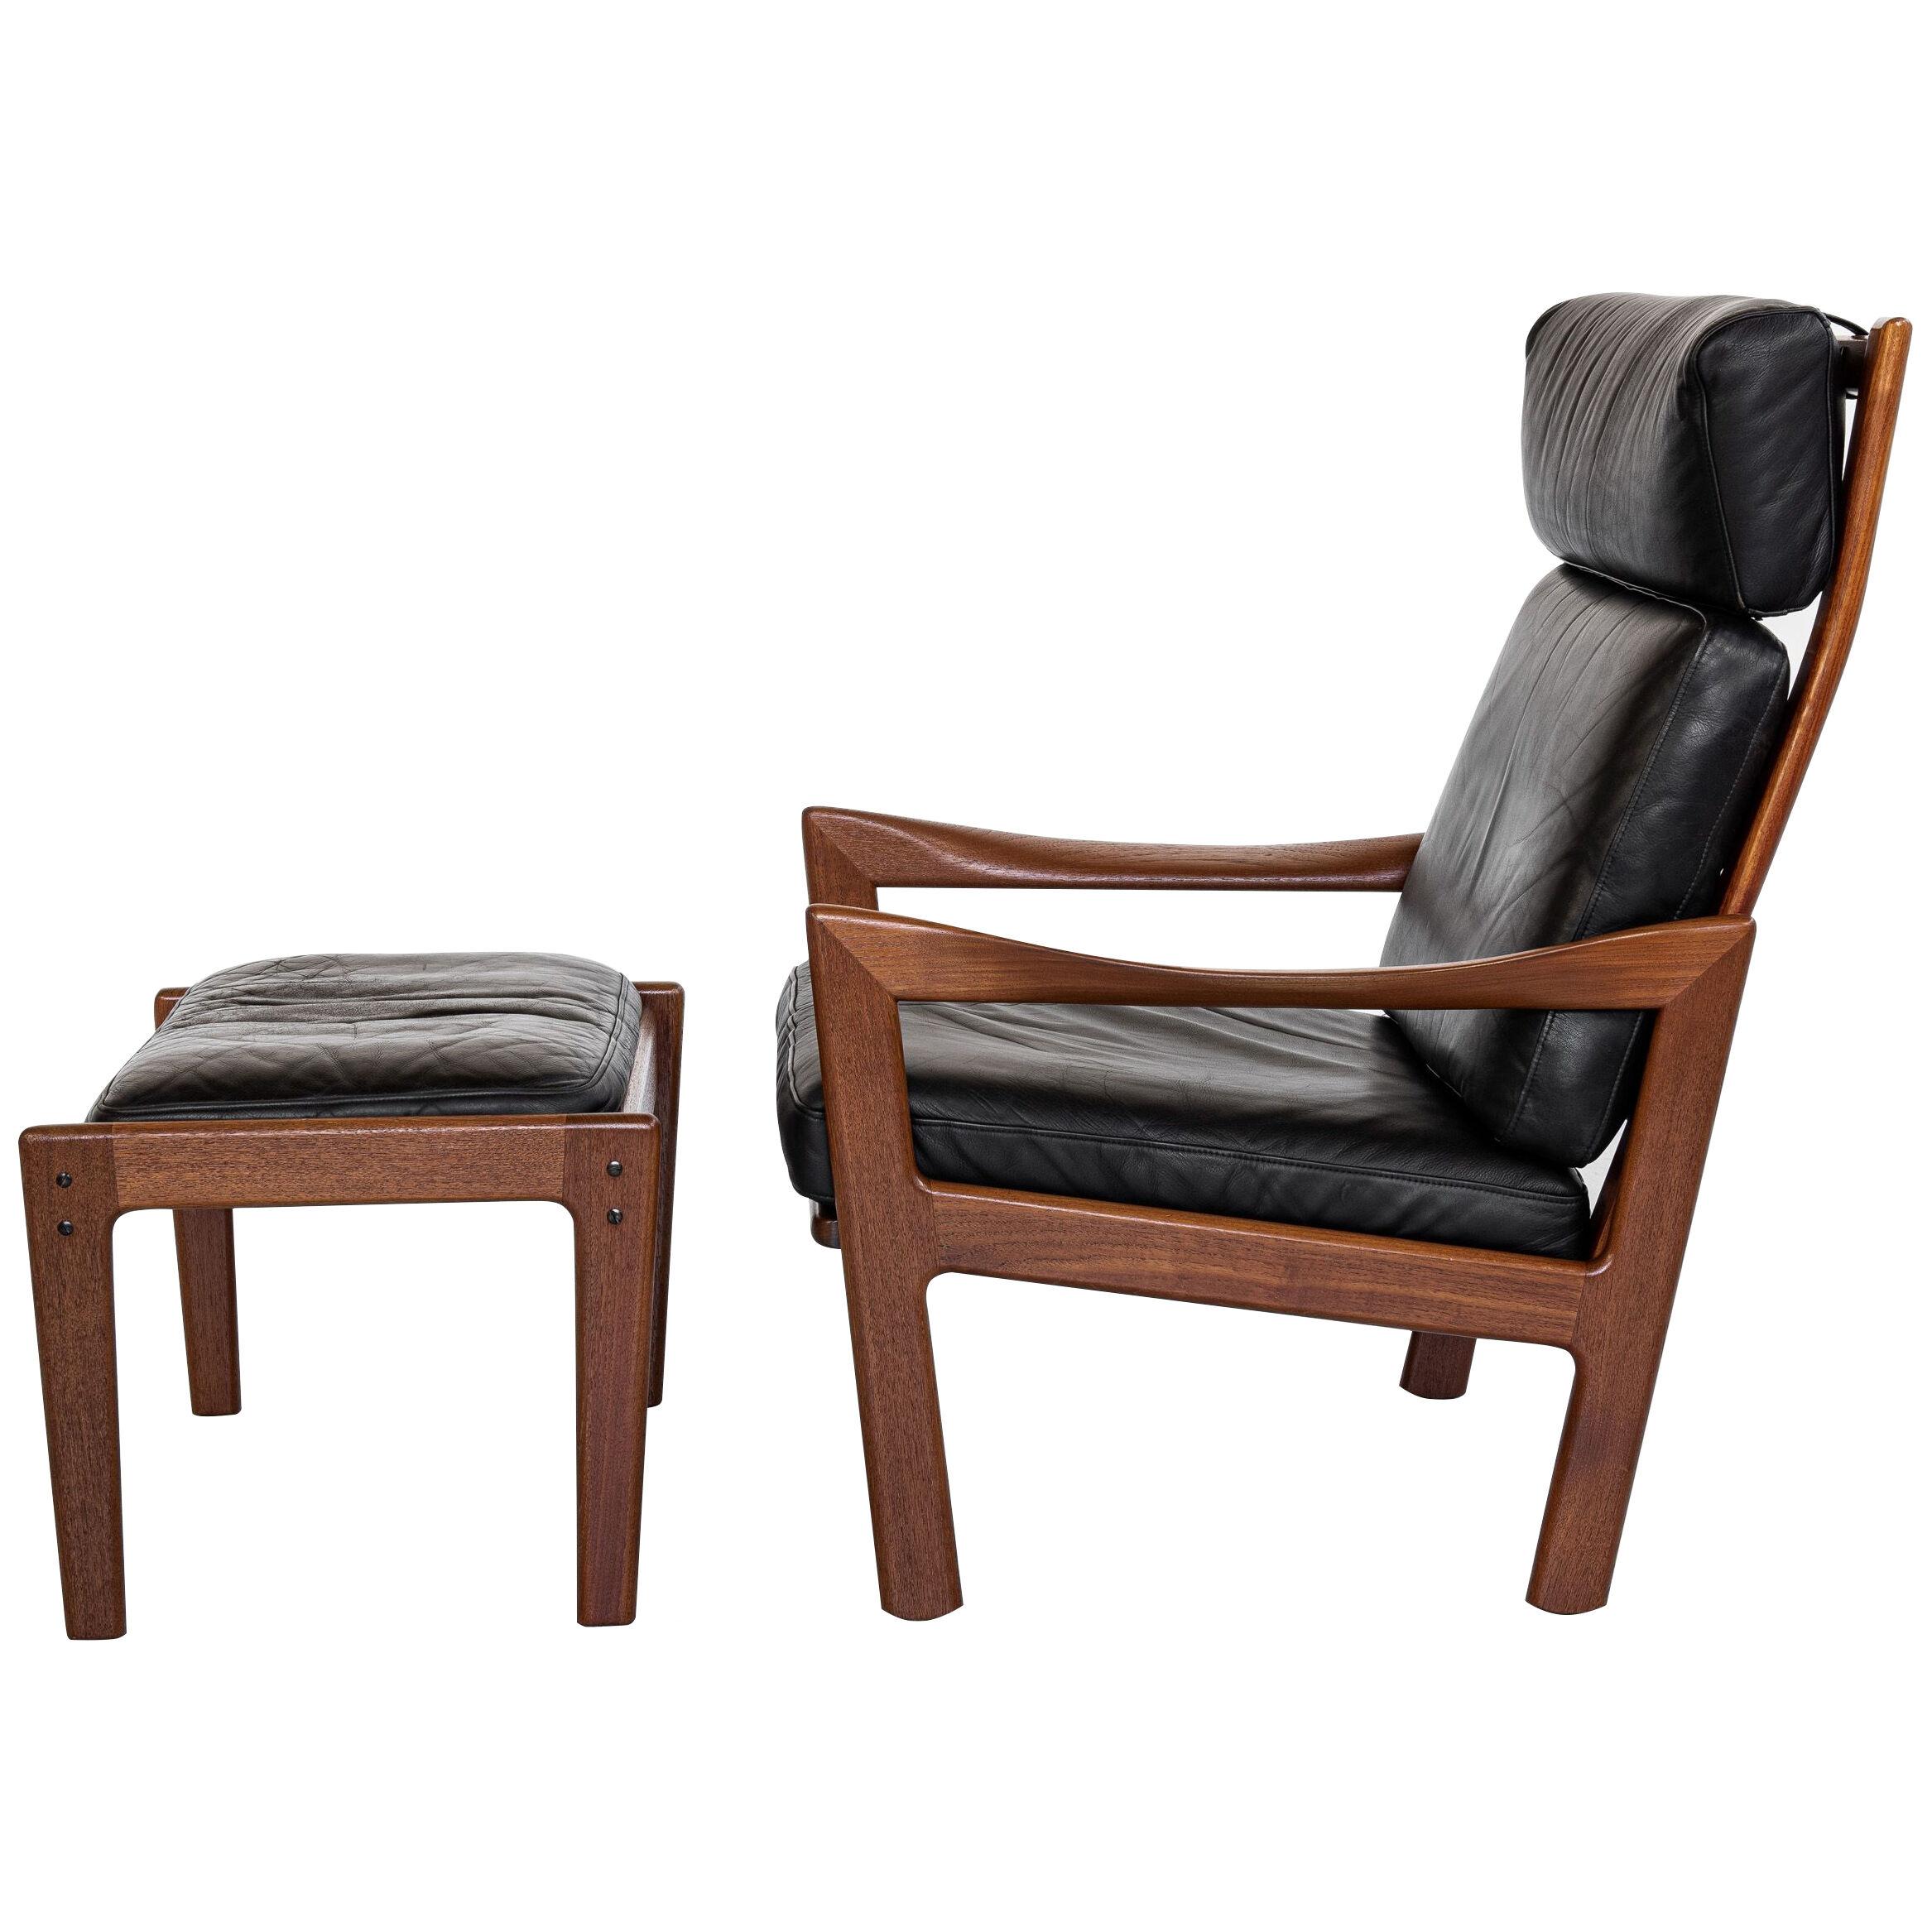 Midcentury Danish lounge chair and ottoman by Illum Wikkelsø for Niels Eilersen